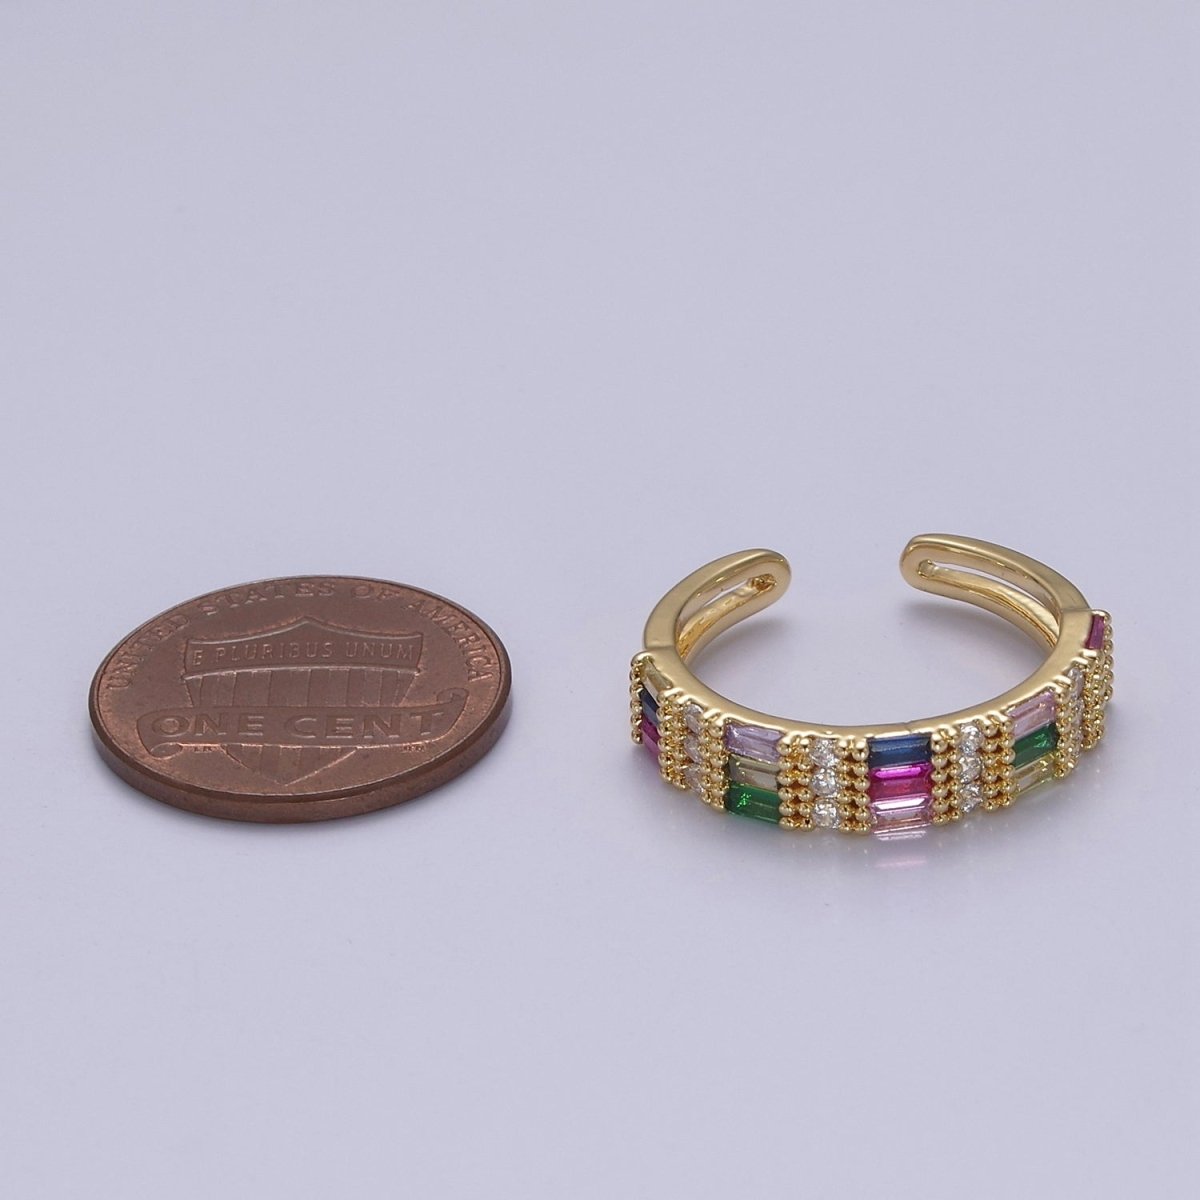 Baguette ring Gold Filled band Stacking ring Rainbow ring Gold Colorful ring Open Adjustable S-474 - DLUXCA